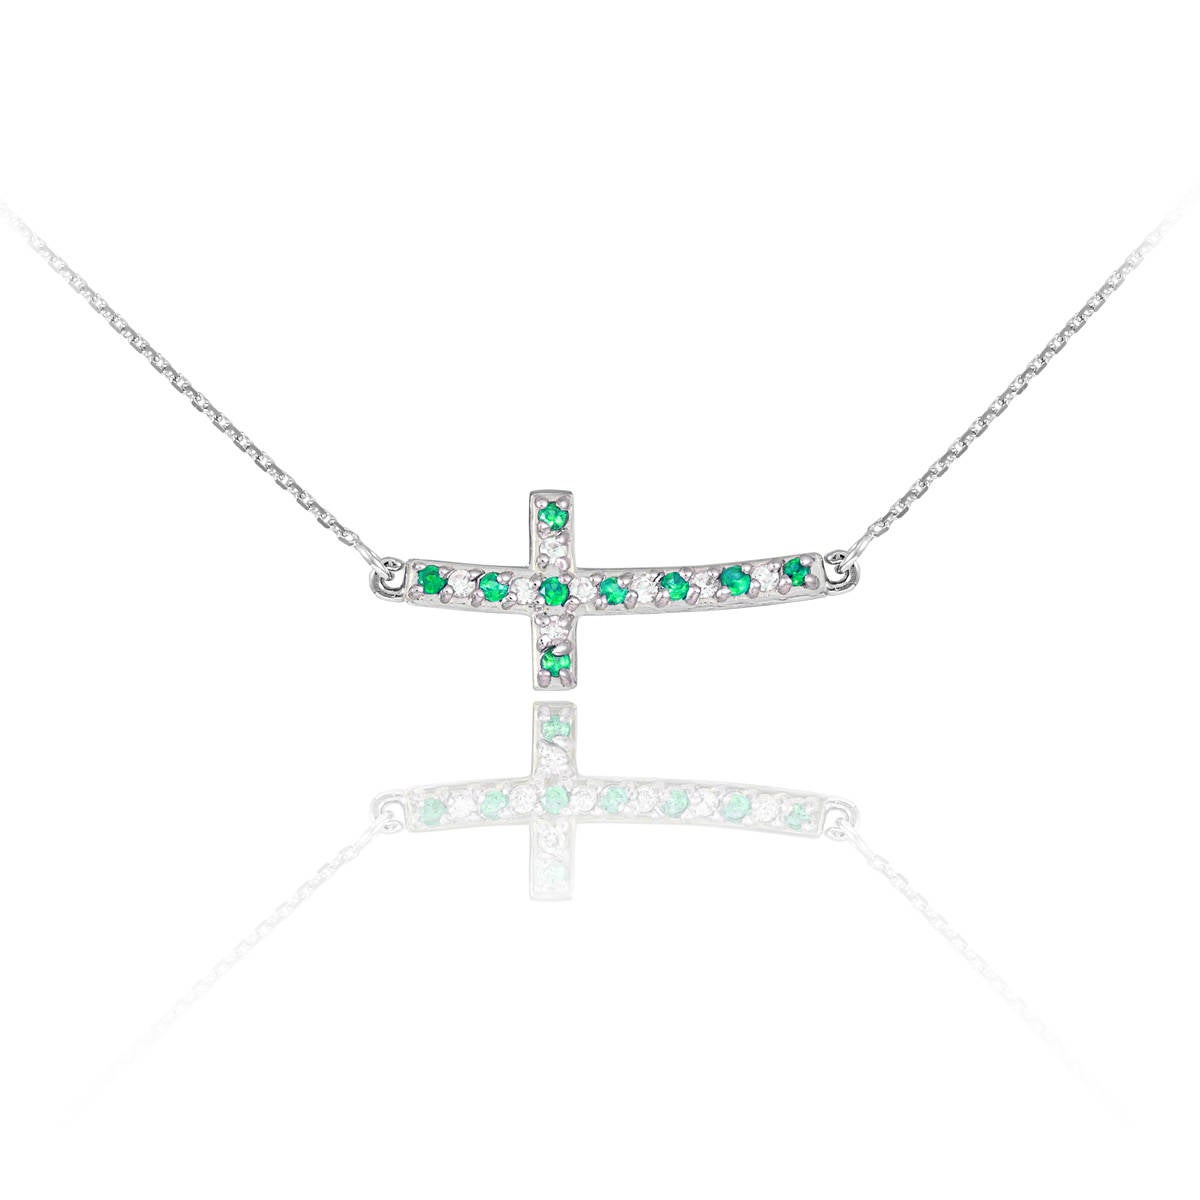 14K Gold Diamond and Emerald Curved Mini Sideways Cross Necklace (yellow, white, rose gold) Karma Blingz